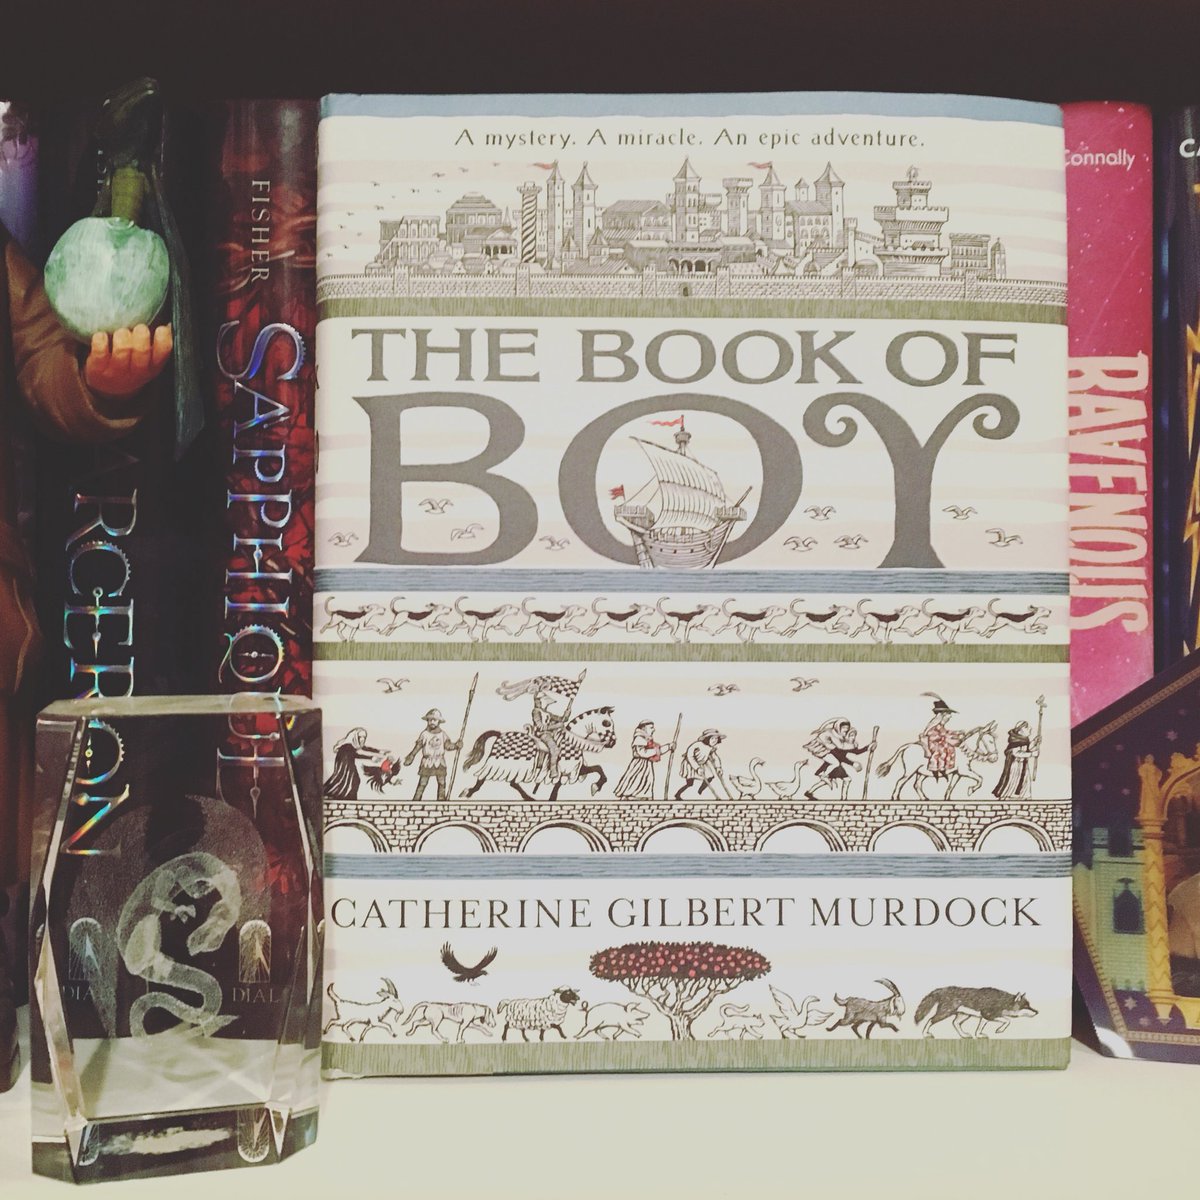 My mailbox was bursting today! This lovely middle grade fantasy will be released February 6, 2018. I’m excited to read it!
#thebookofboy #catherinegilbertmurdock #greenwillowbooks